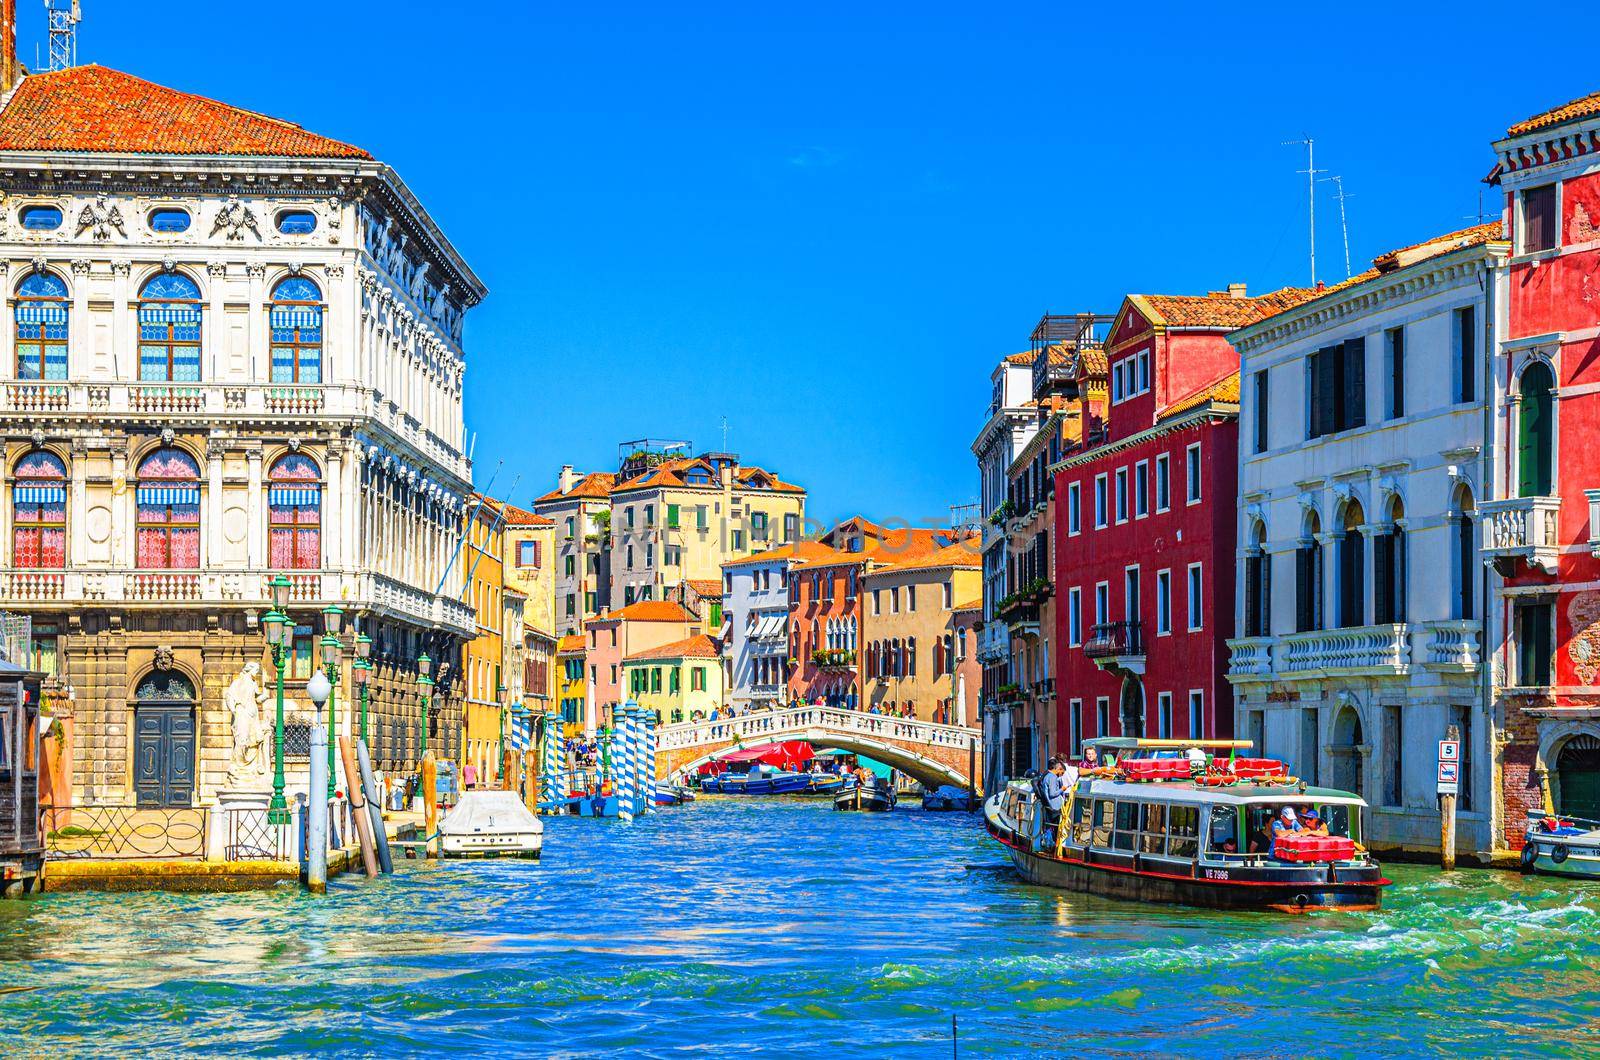 Venice, Italy, September 13, 2019: Grand Canal waterway across Cannaregio Canal with Palazzo Labia palace, Ponte delle Guglie bridge and vaporetto sailing in water, blue sky background in summer day